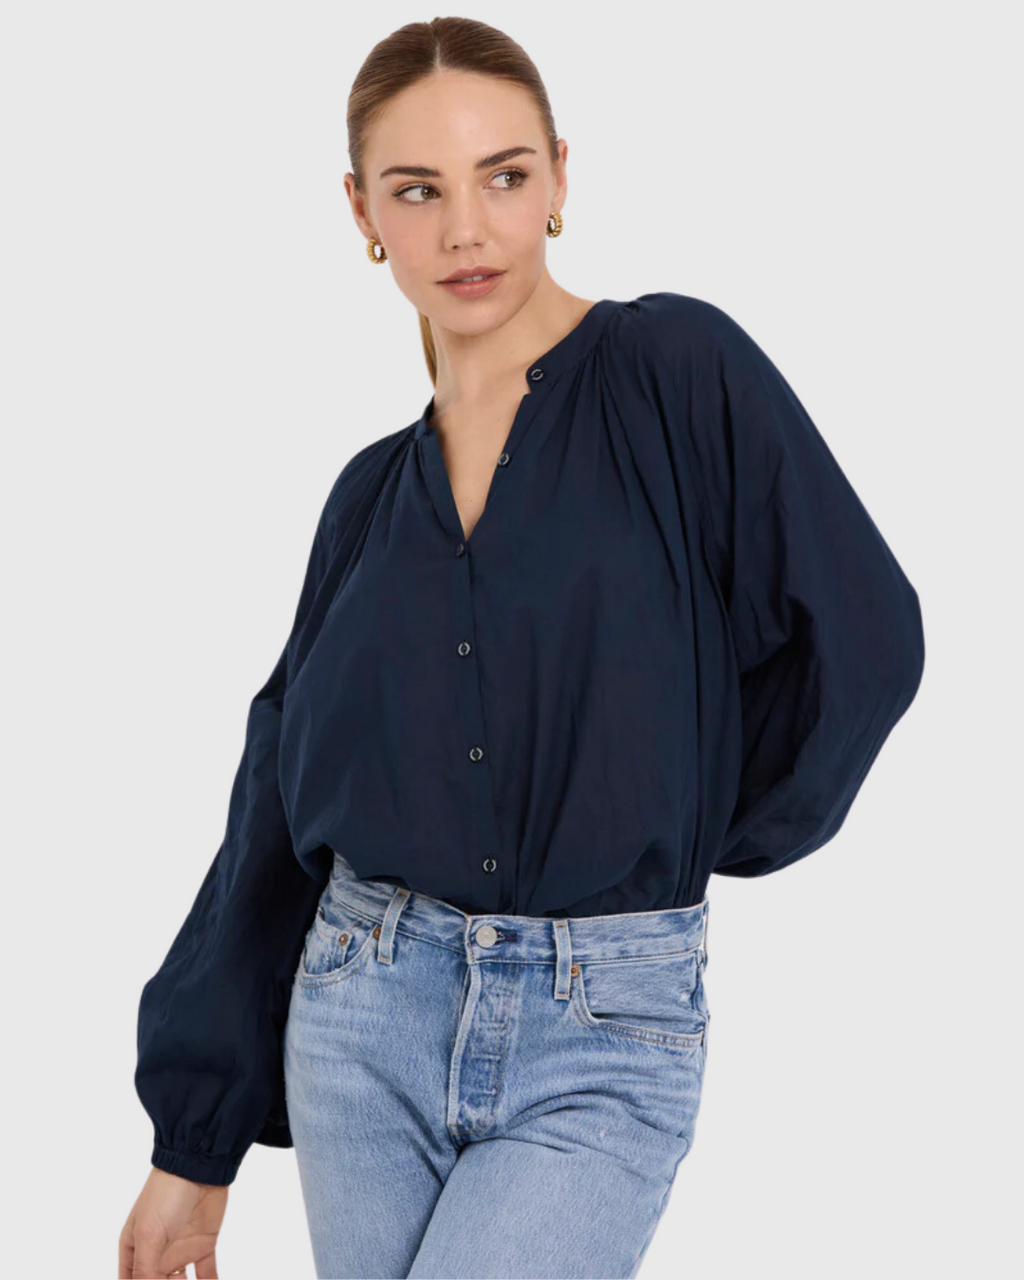 tuesday pioneer top navy